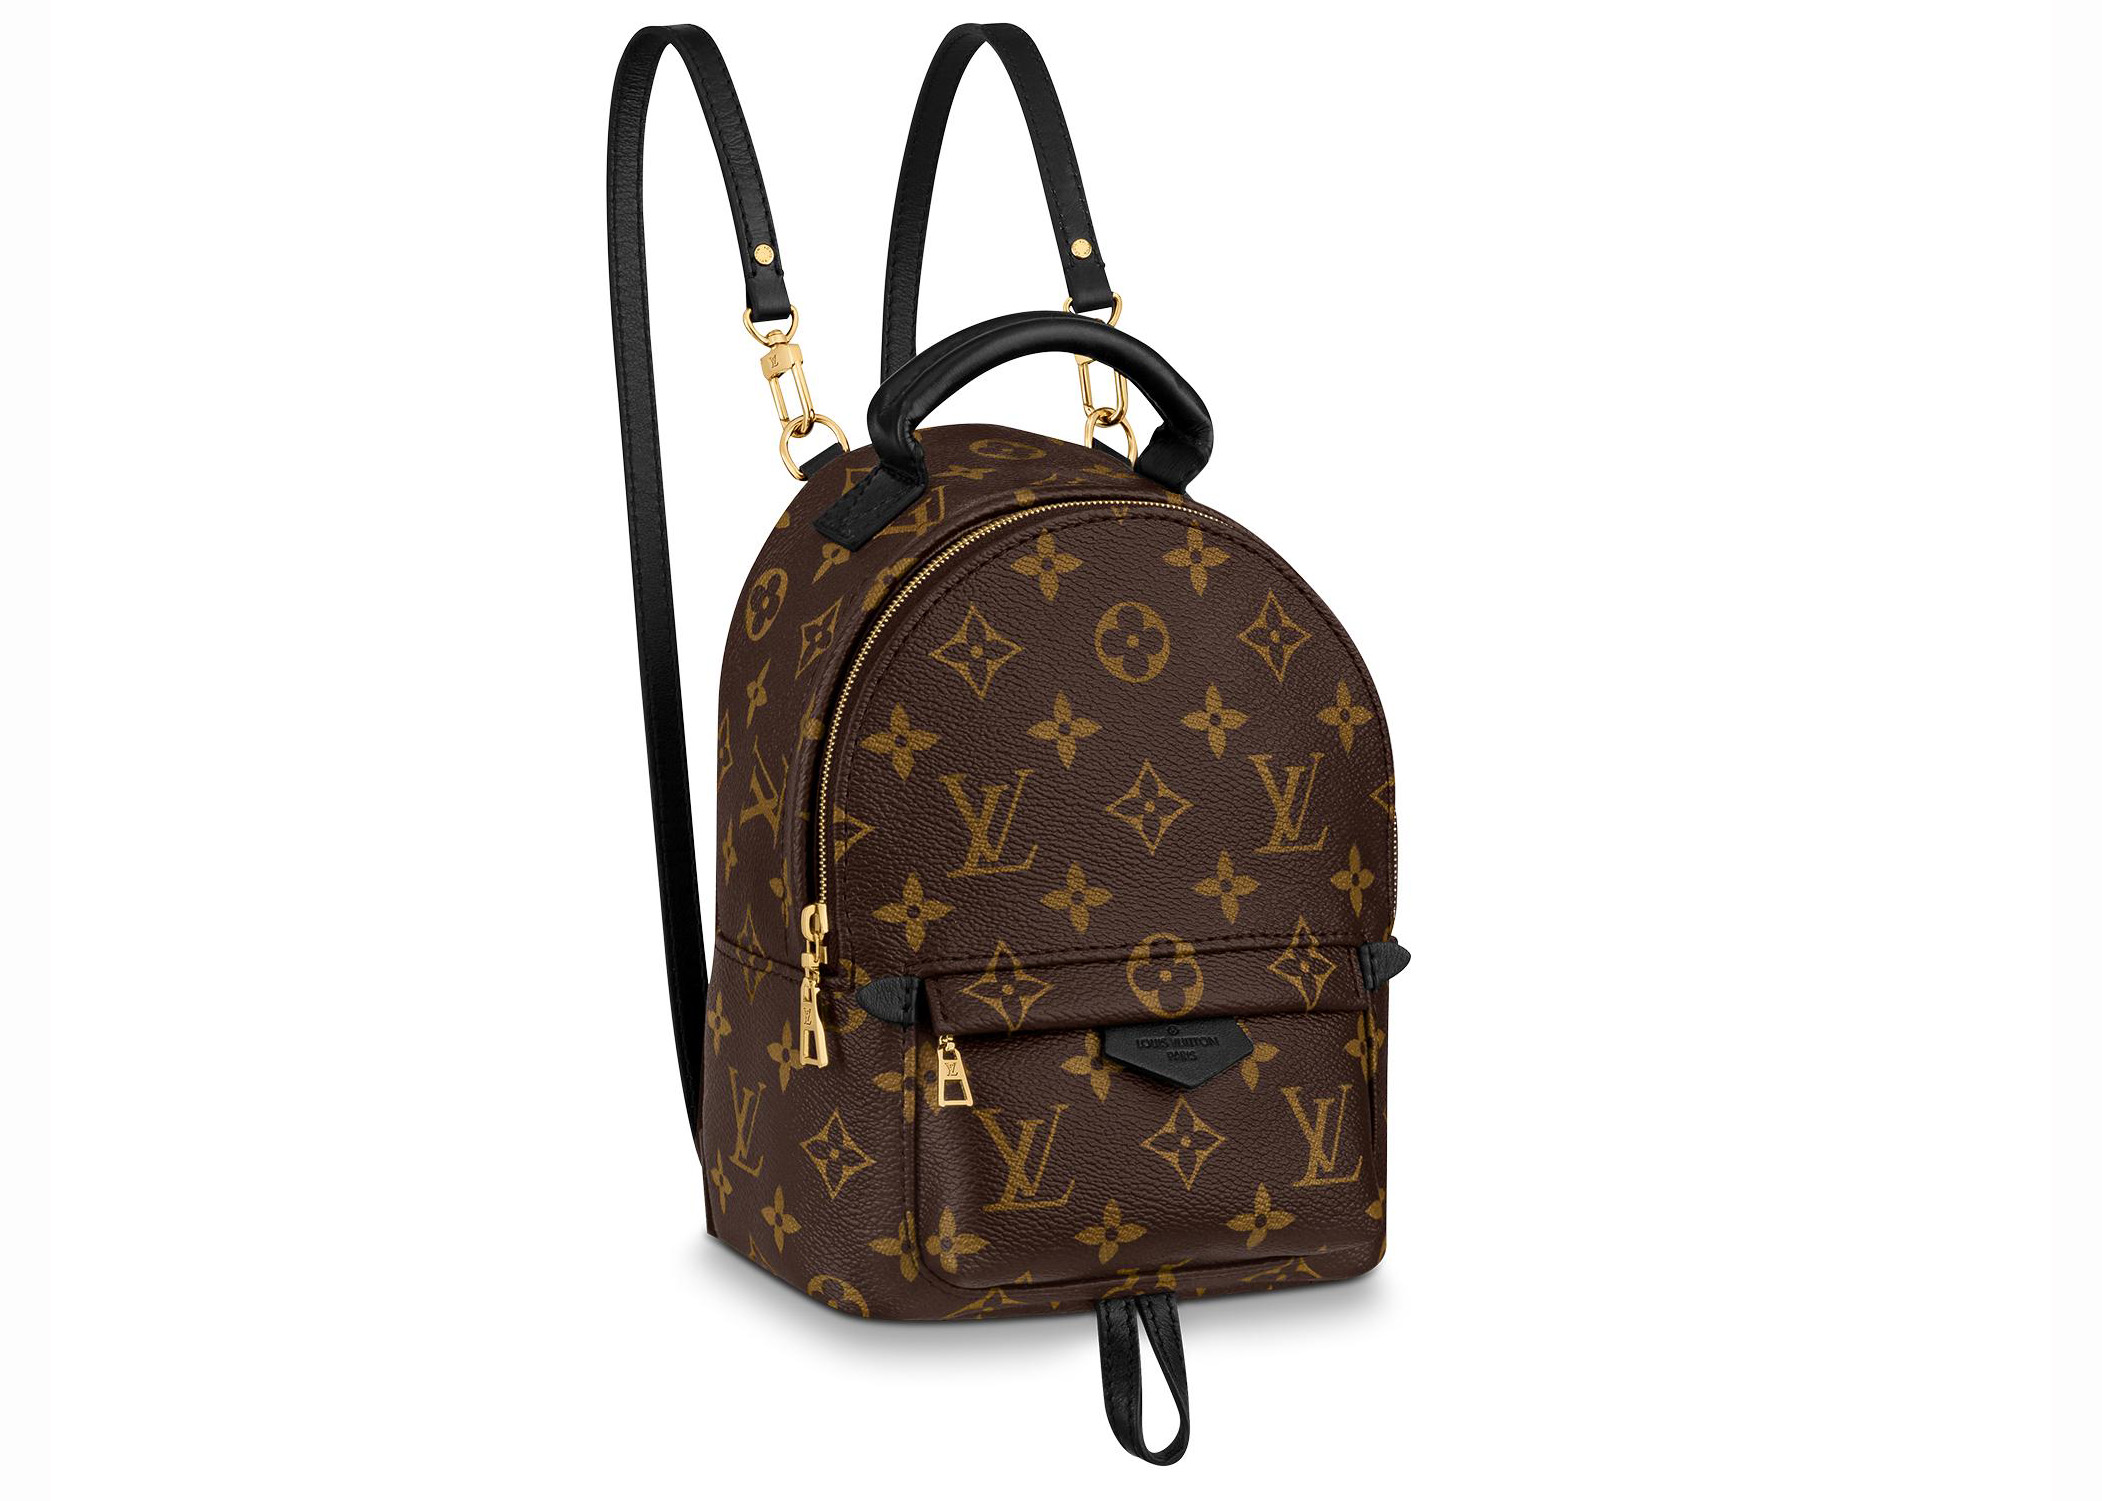 ✔︎LouisVuitton backpack リュック/バックパック バッグ メンズ 在庫限り送料無料